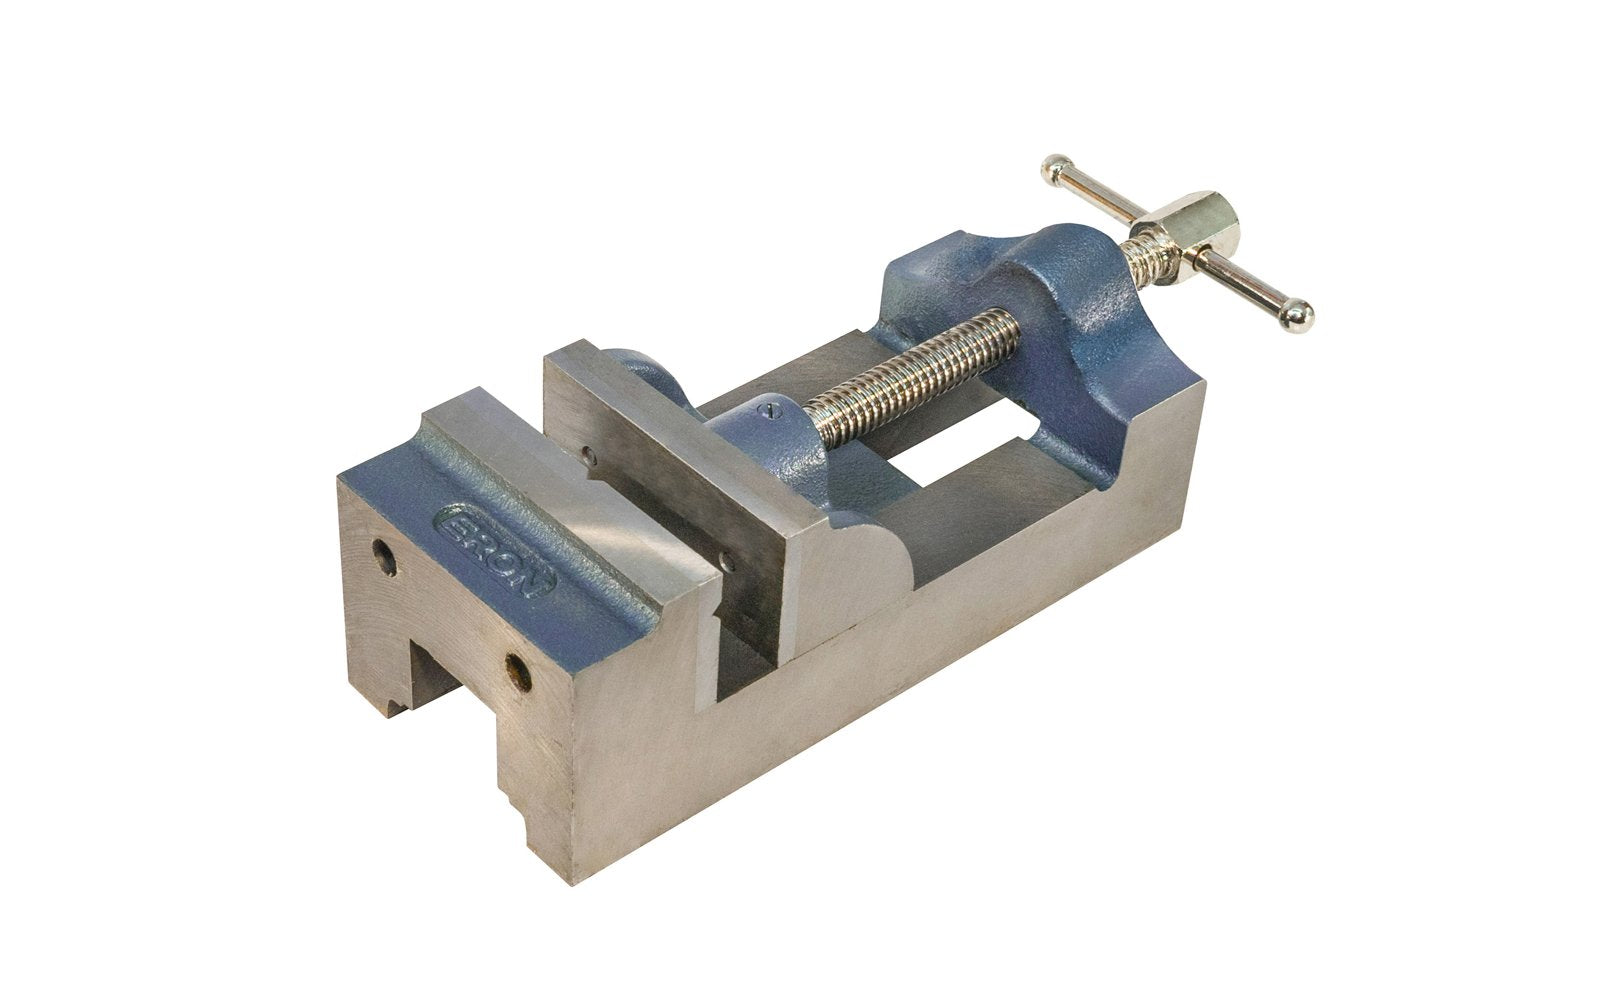 Japanese 2-1/2" Drill Press Vise - Eron Vise ~ Top faces & side faces have a ground finish for high accuracy - 2-1/2" jaw opening - 2-1/2" jaw width - Eron Model No. P250 - Main screw with acme thread for smooth operation & allows for powerful clamping - 6 lb. weight - Heavy Duty